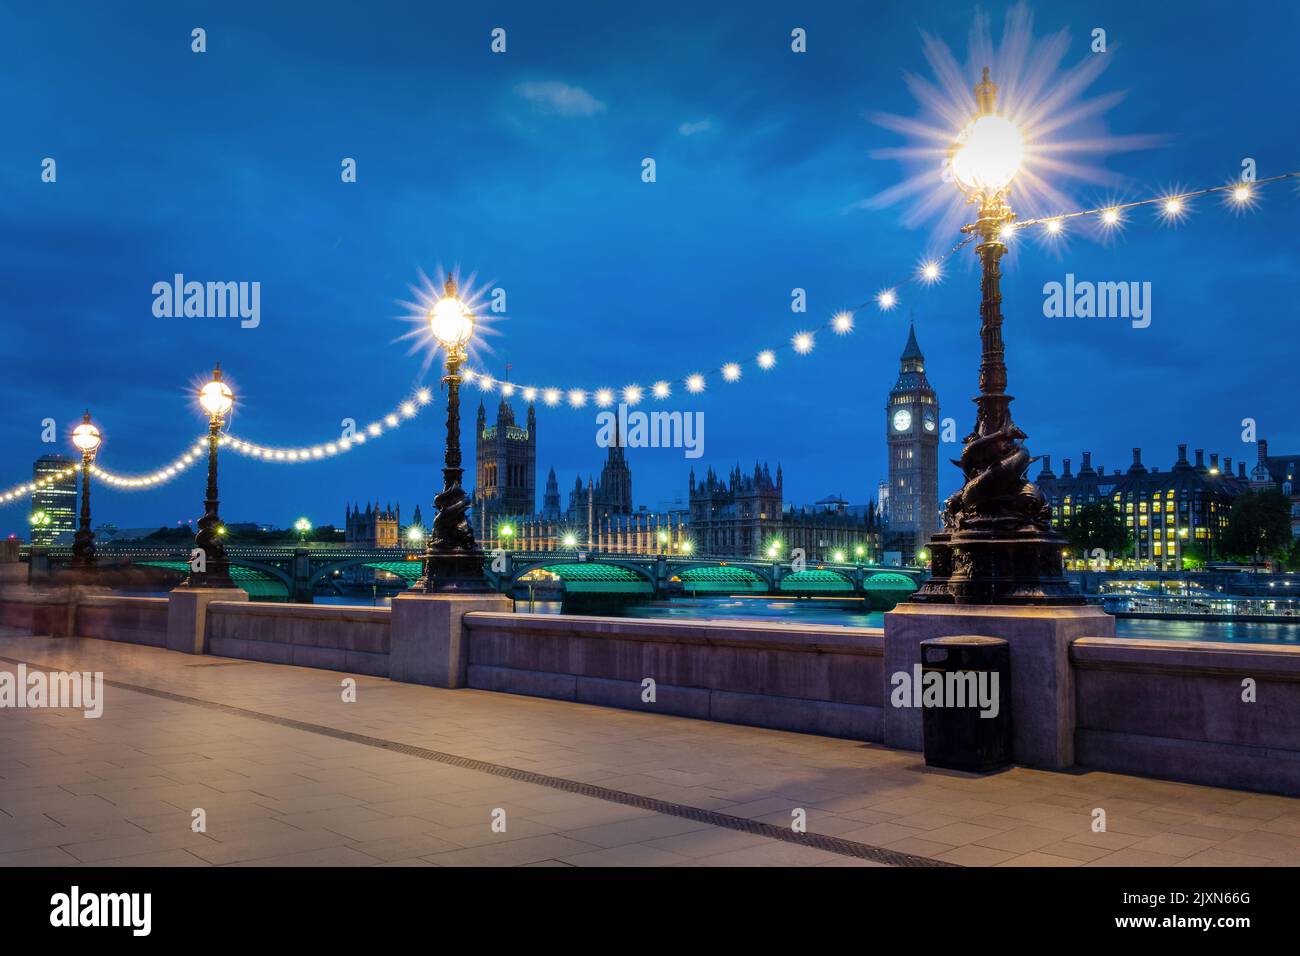 Lampposts illuminated at night on the Queen's Walk, view on Westminster palace and Big Ben in London, UK Stock Photo